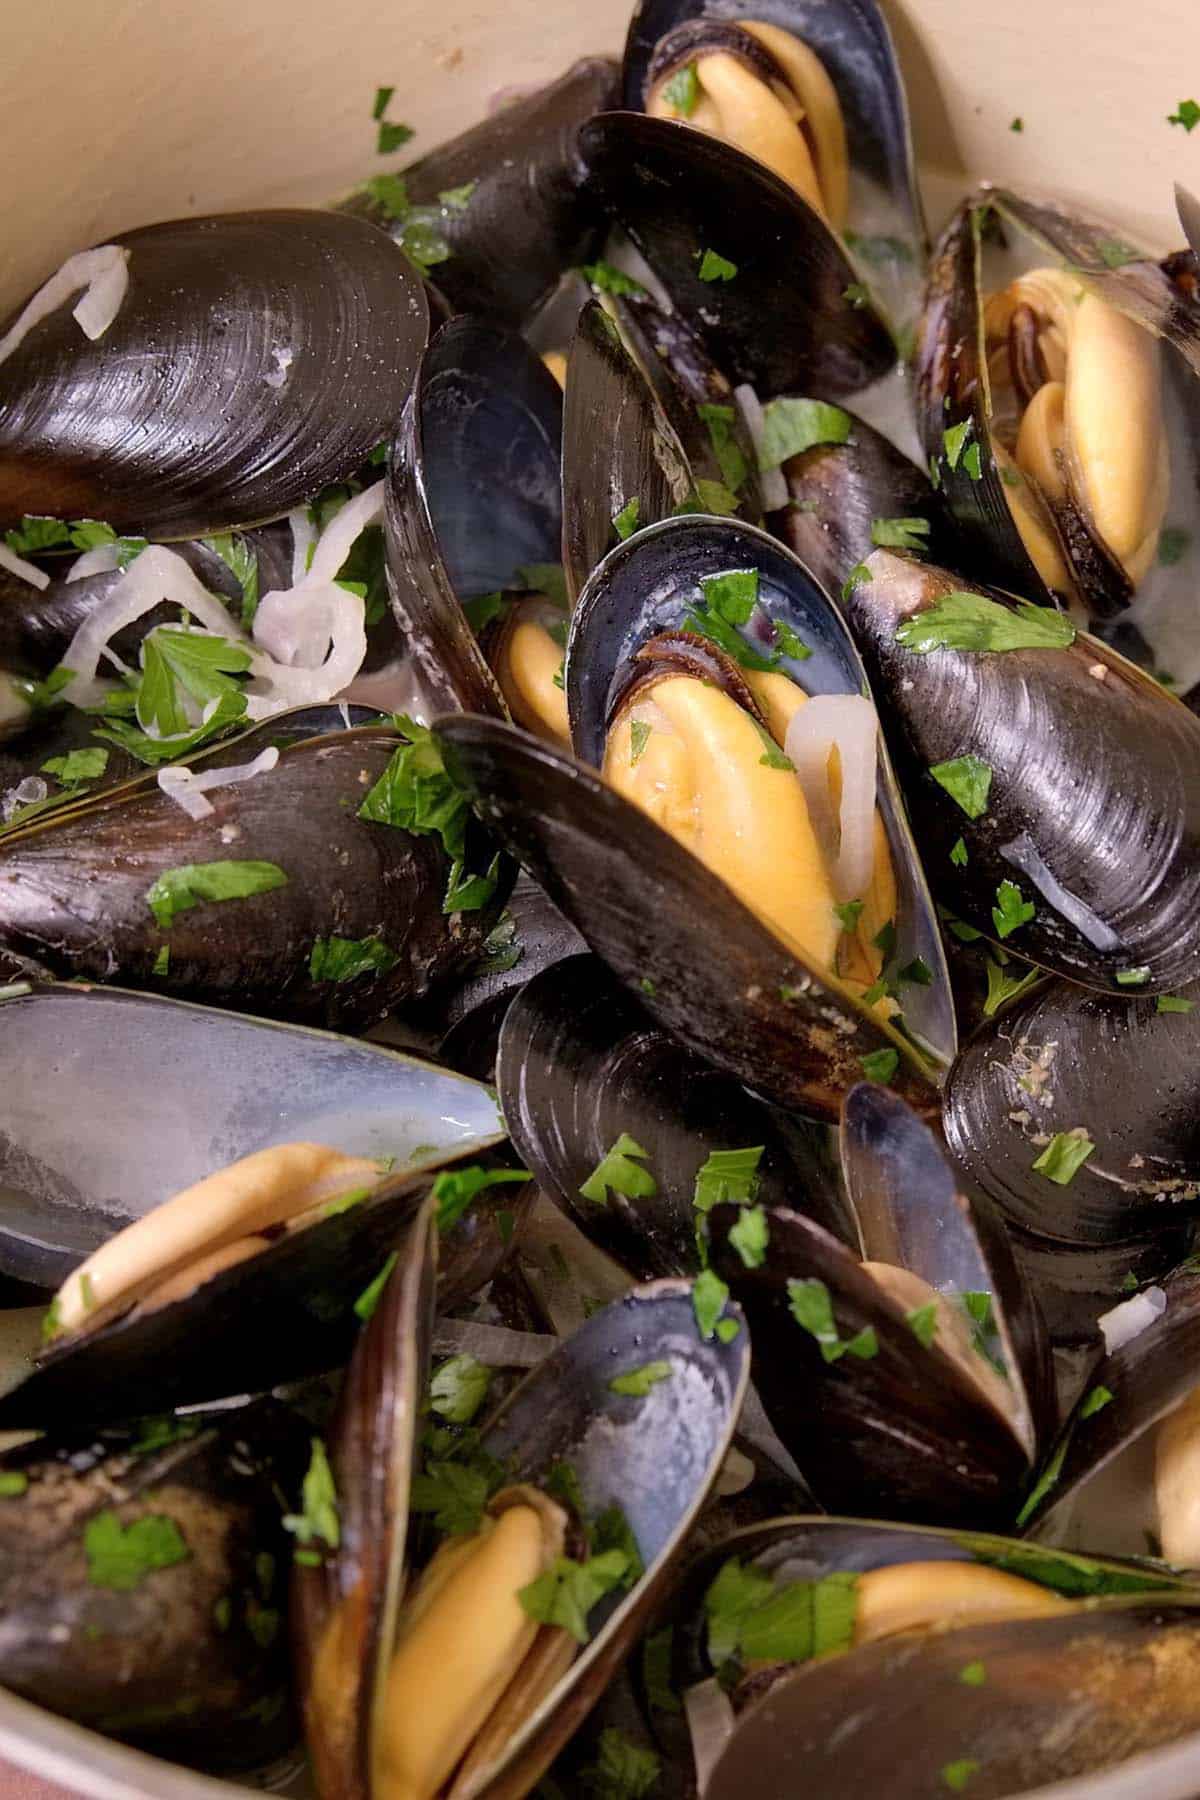 Steamed Mussels with shallots, garlic, parsley and a white wine broth